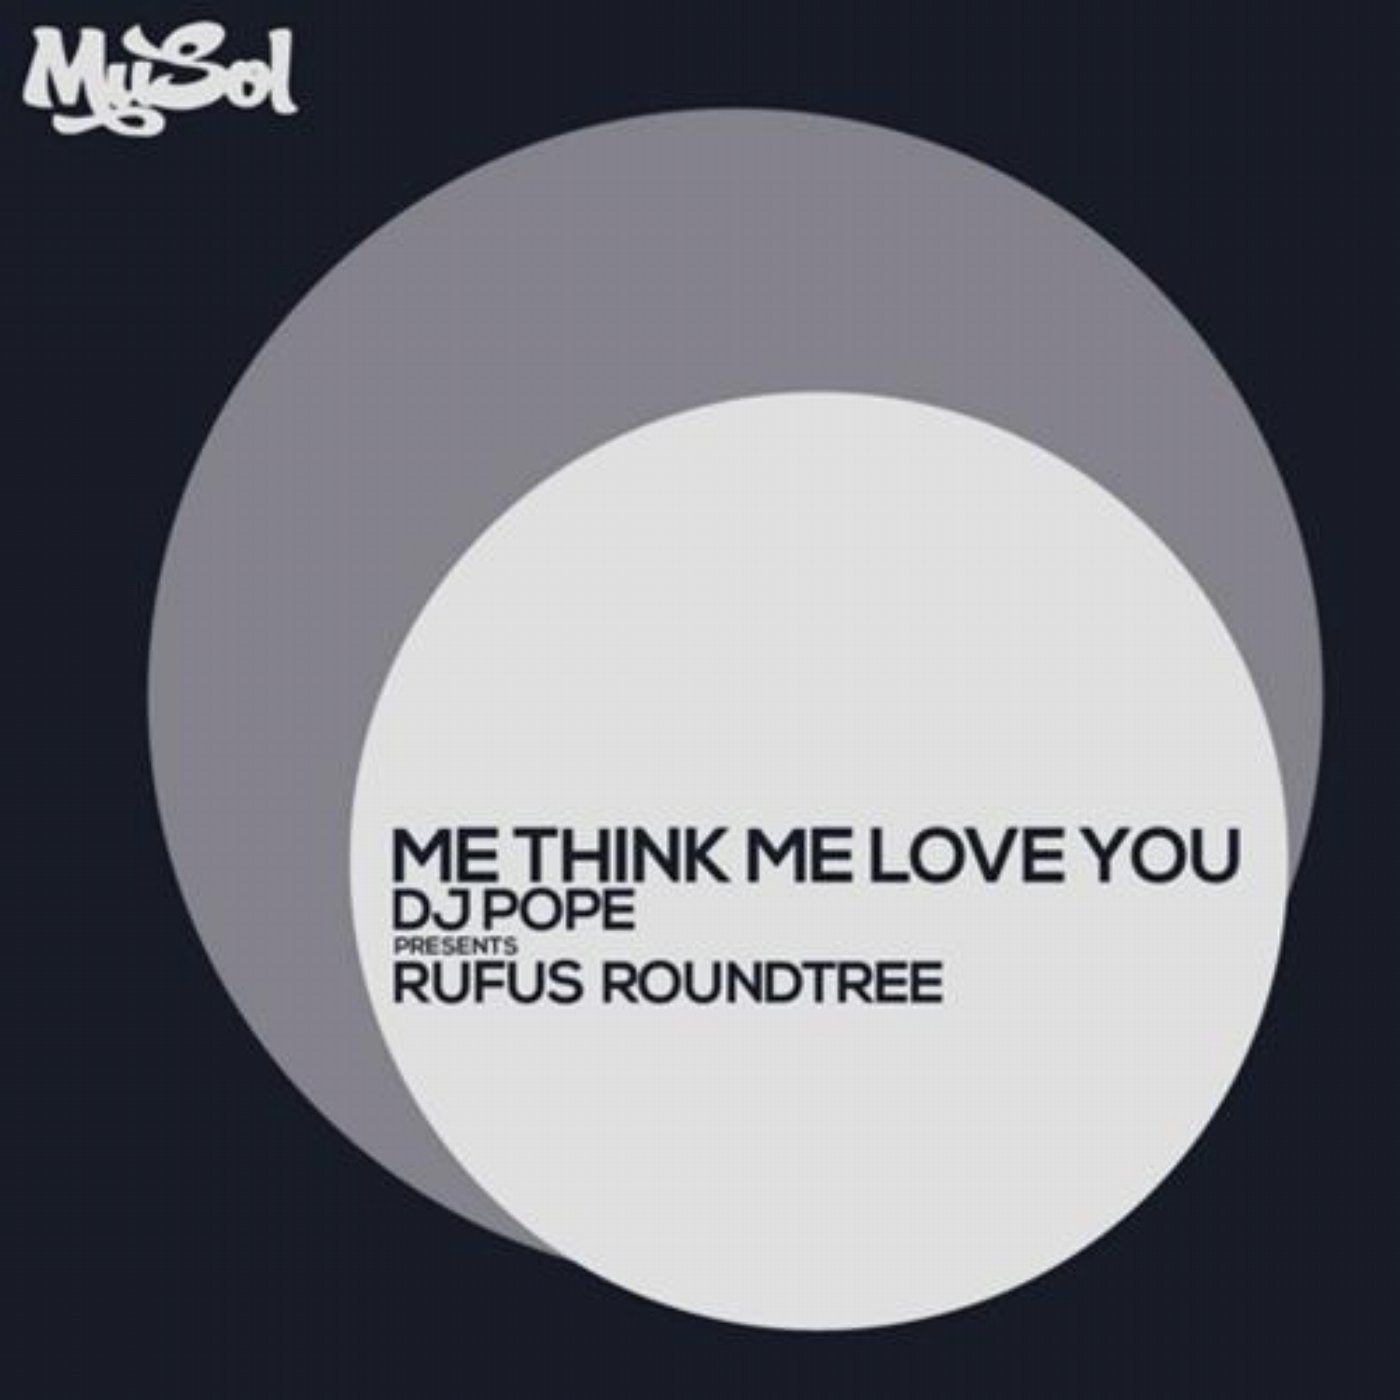 Me Think Me Love You (Dj Pope Presents Rufus Roundtree)